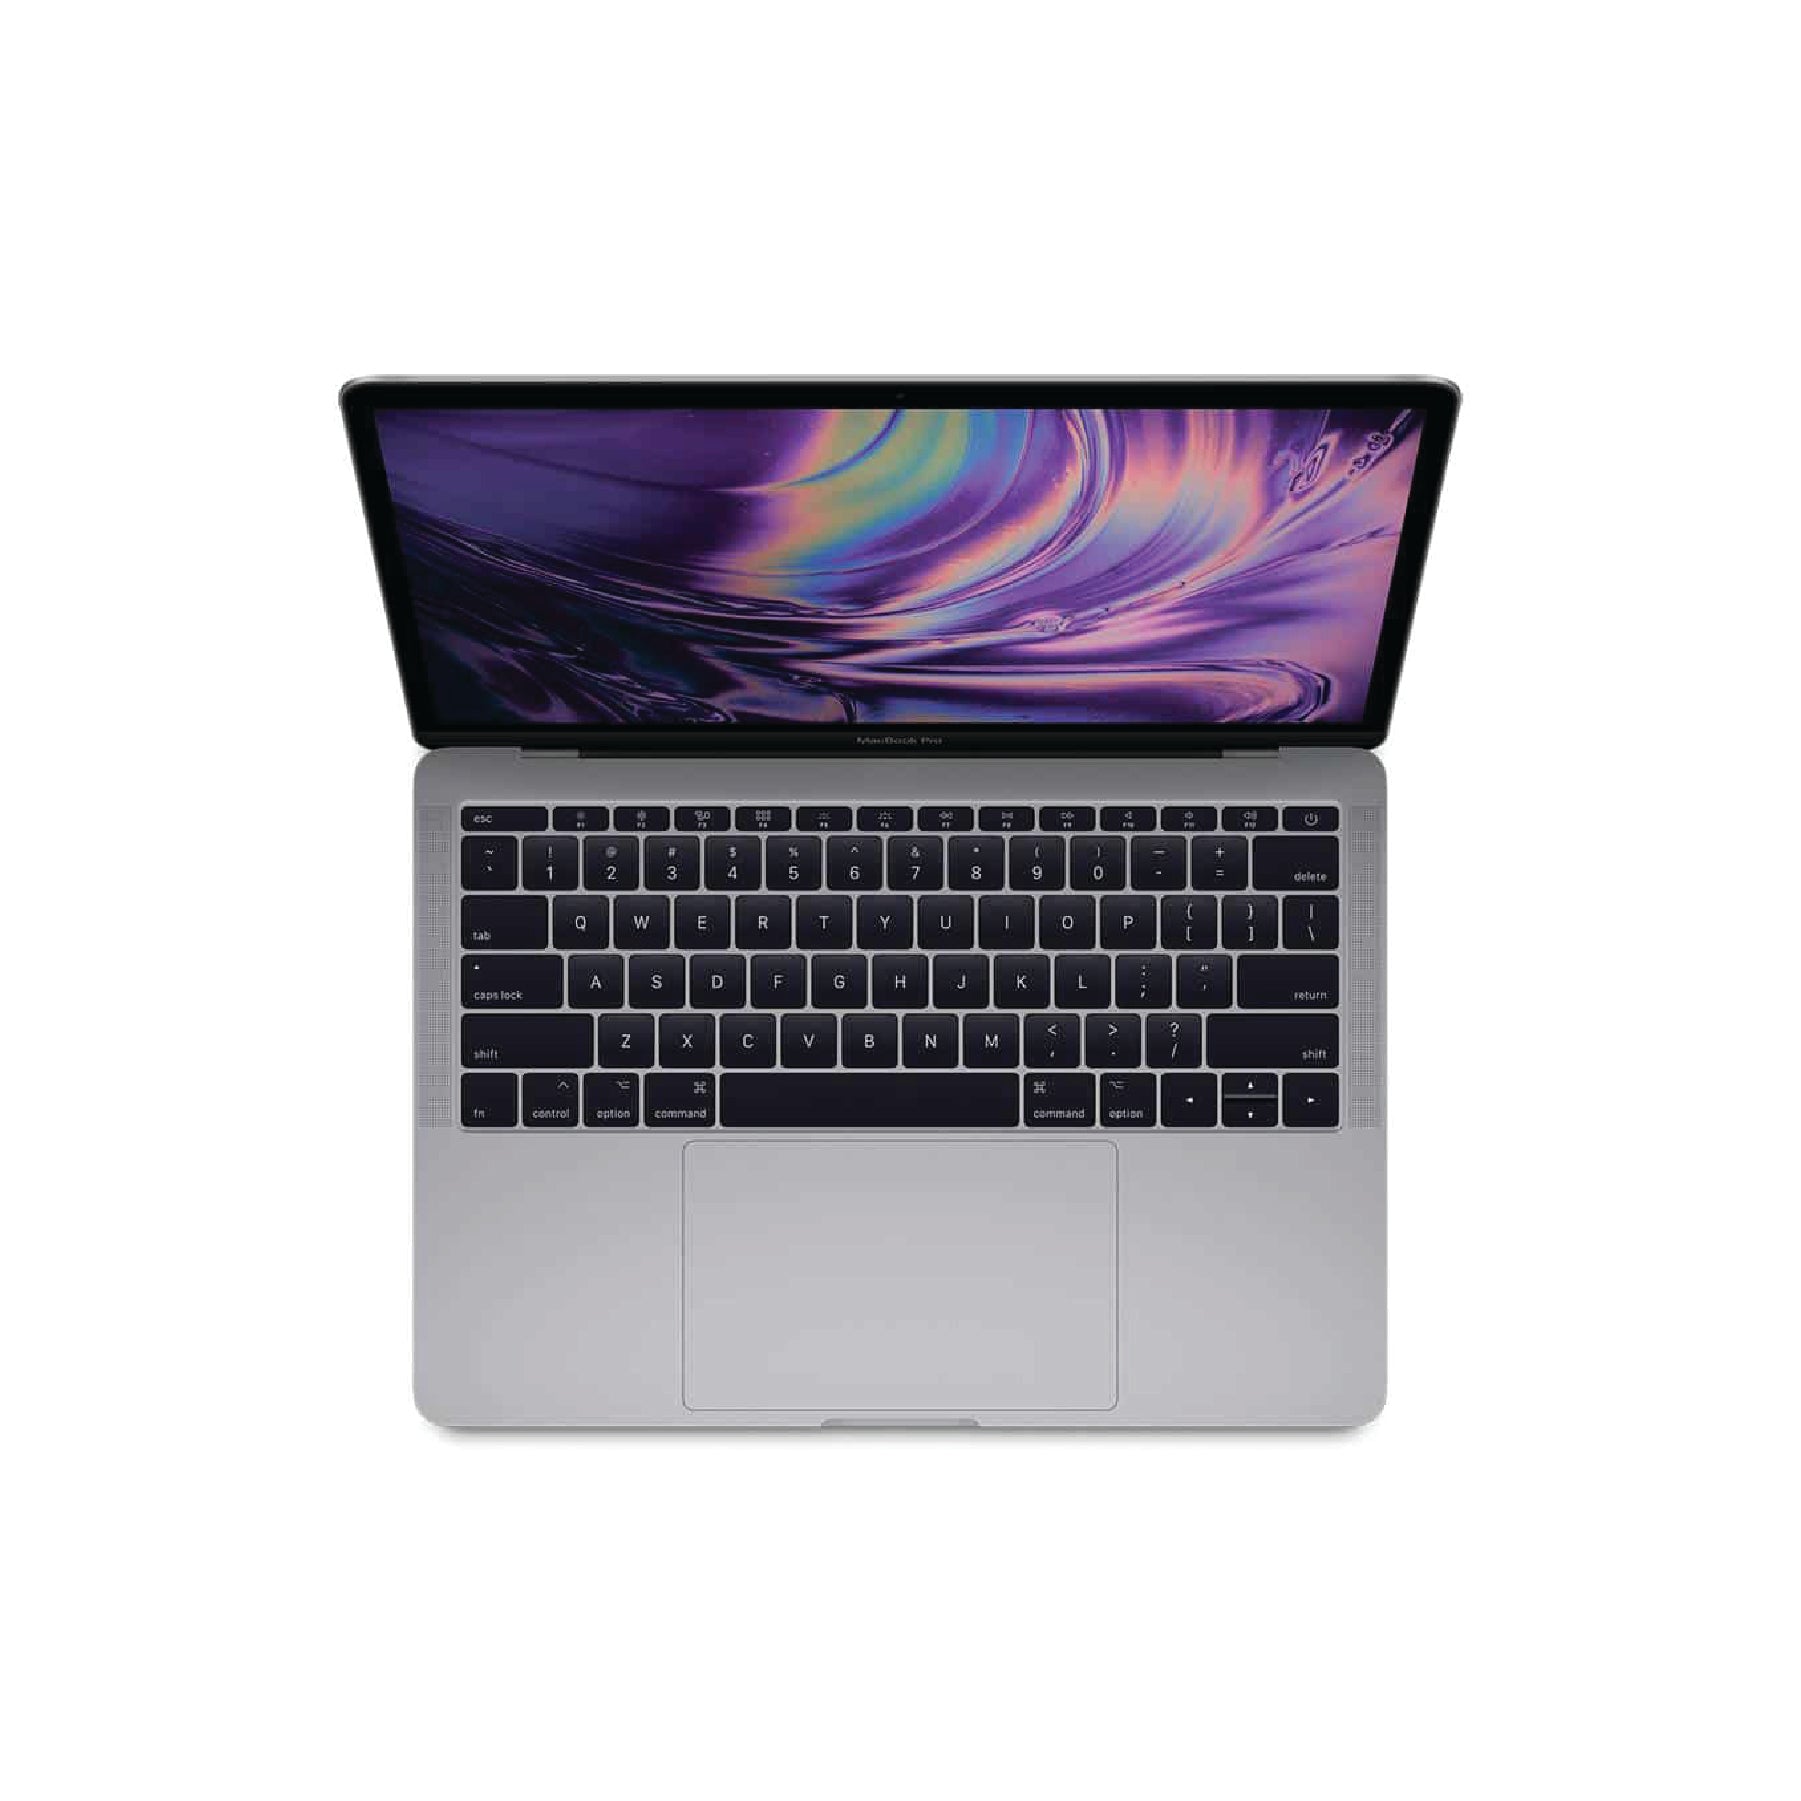 MacBook Pro (13-inch, 2017, Two Thunderbolt 3 ports) 2.3GHz, Intel Core i5 256GB - Space Grey (Better) - iStore Pre-owned